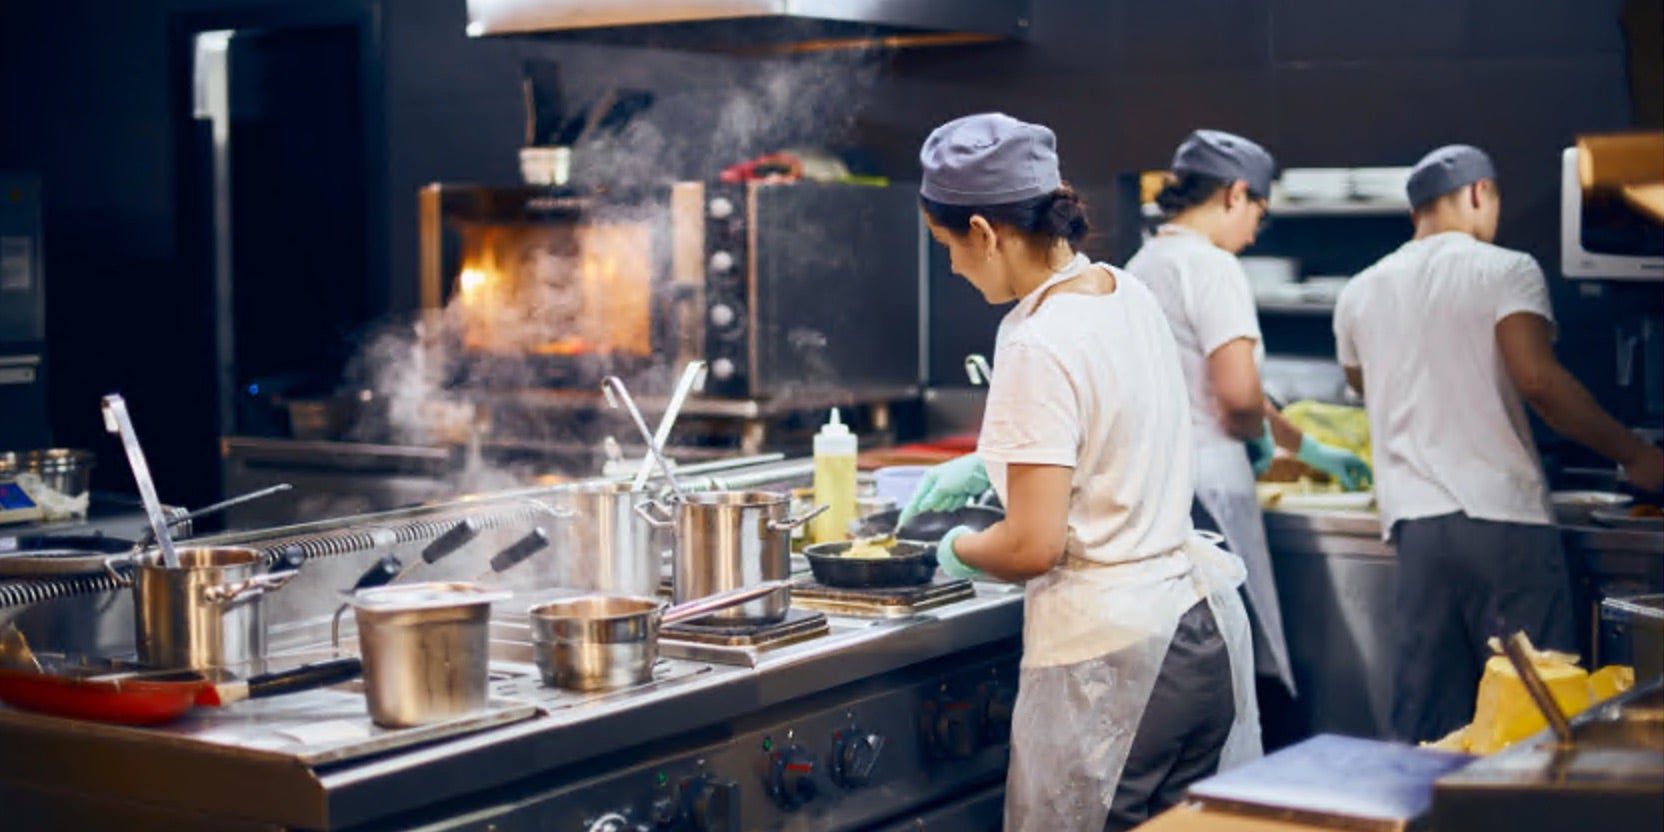 Image of Chefs working in an industrial kitchen